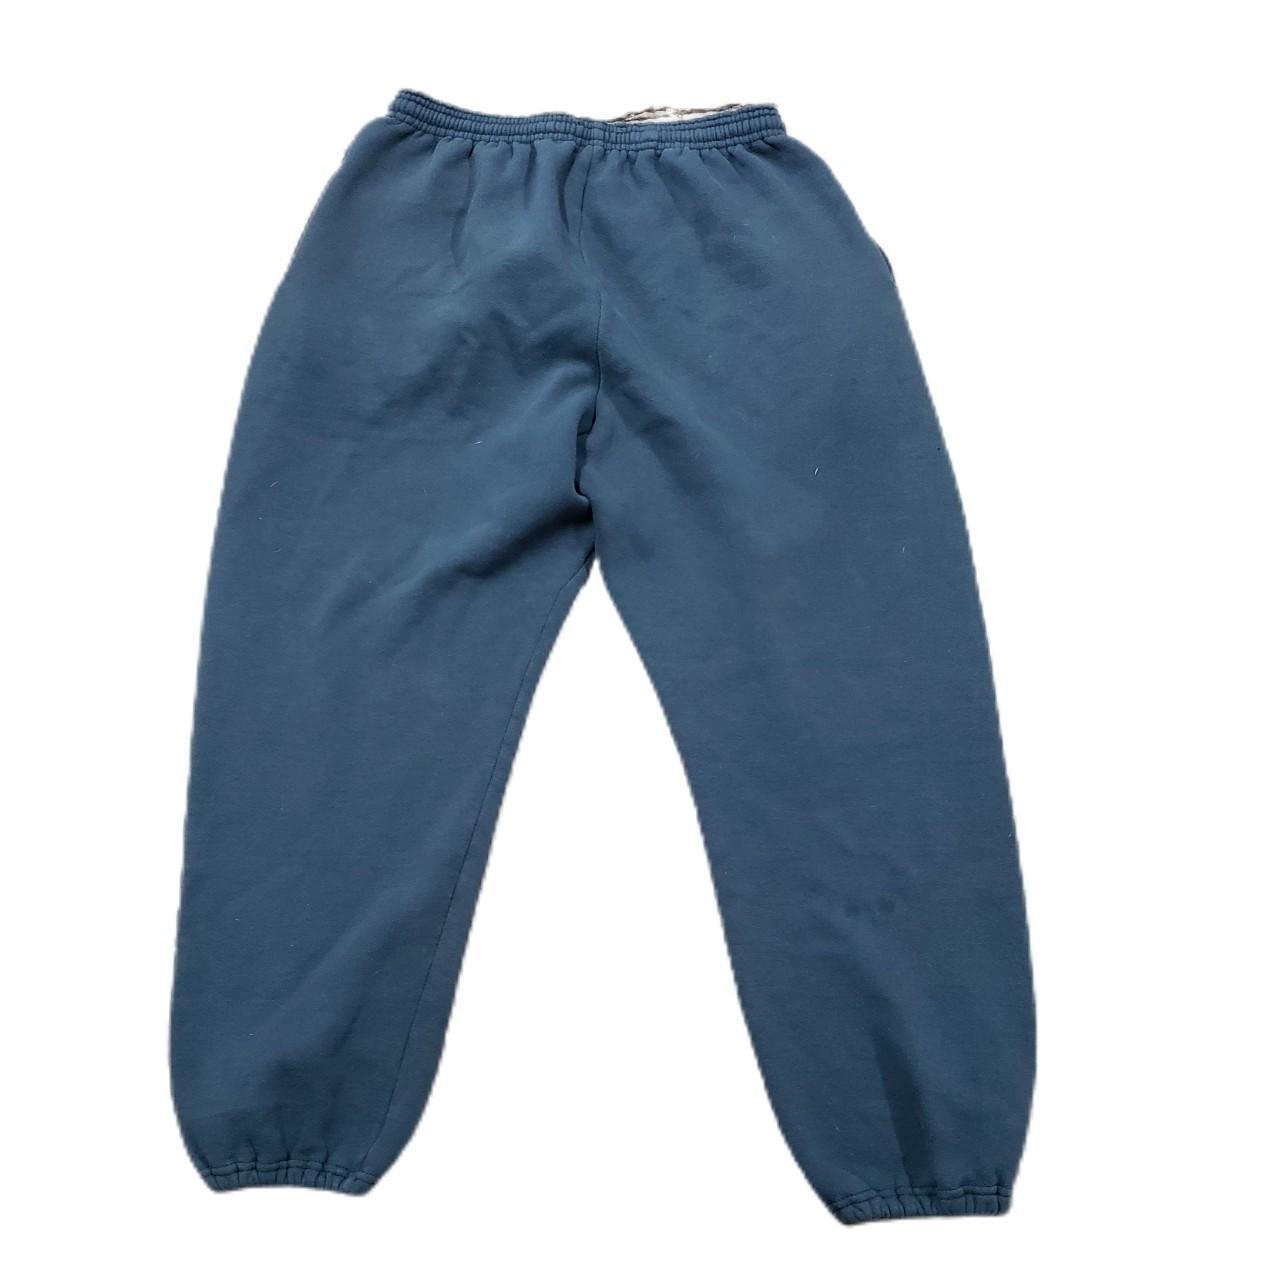 Product Image 3 - Men's Russell Athletic Sweatpants 

Size: